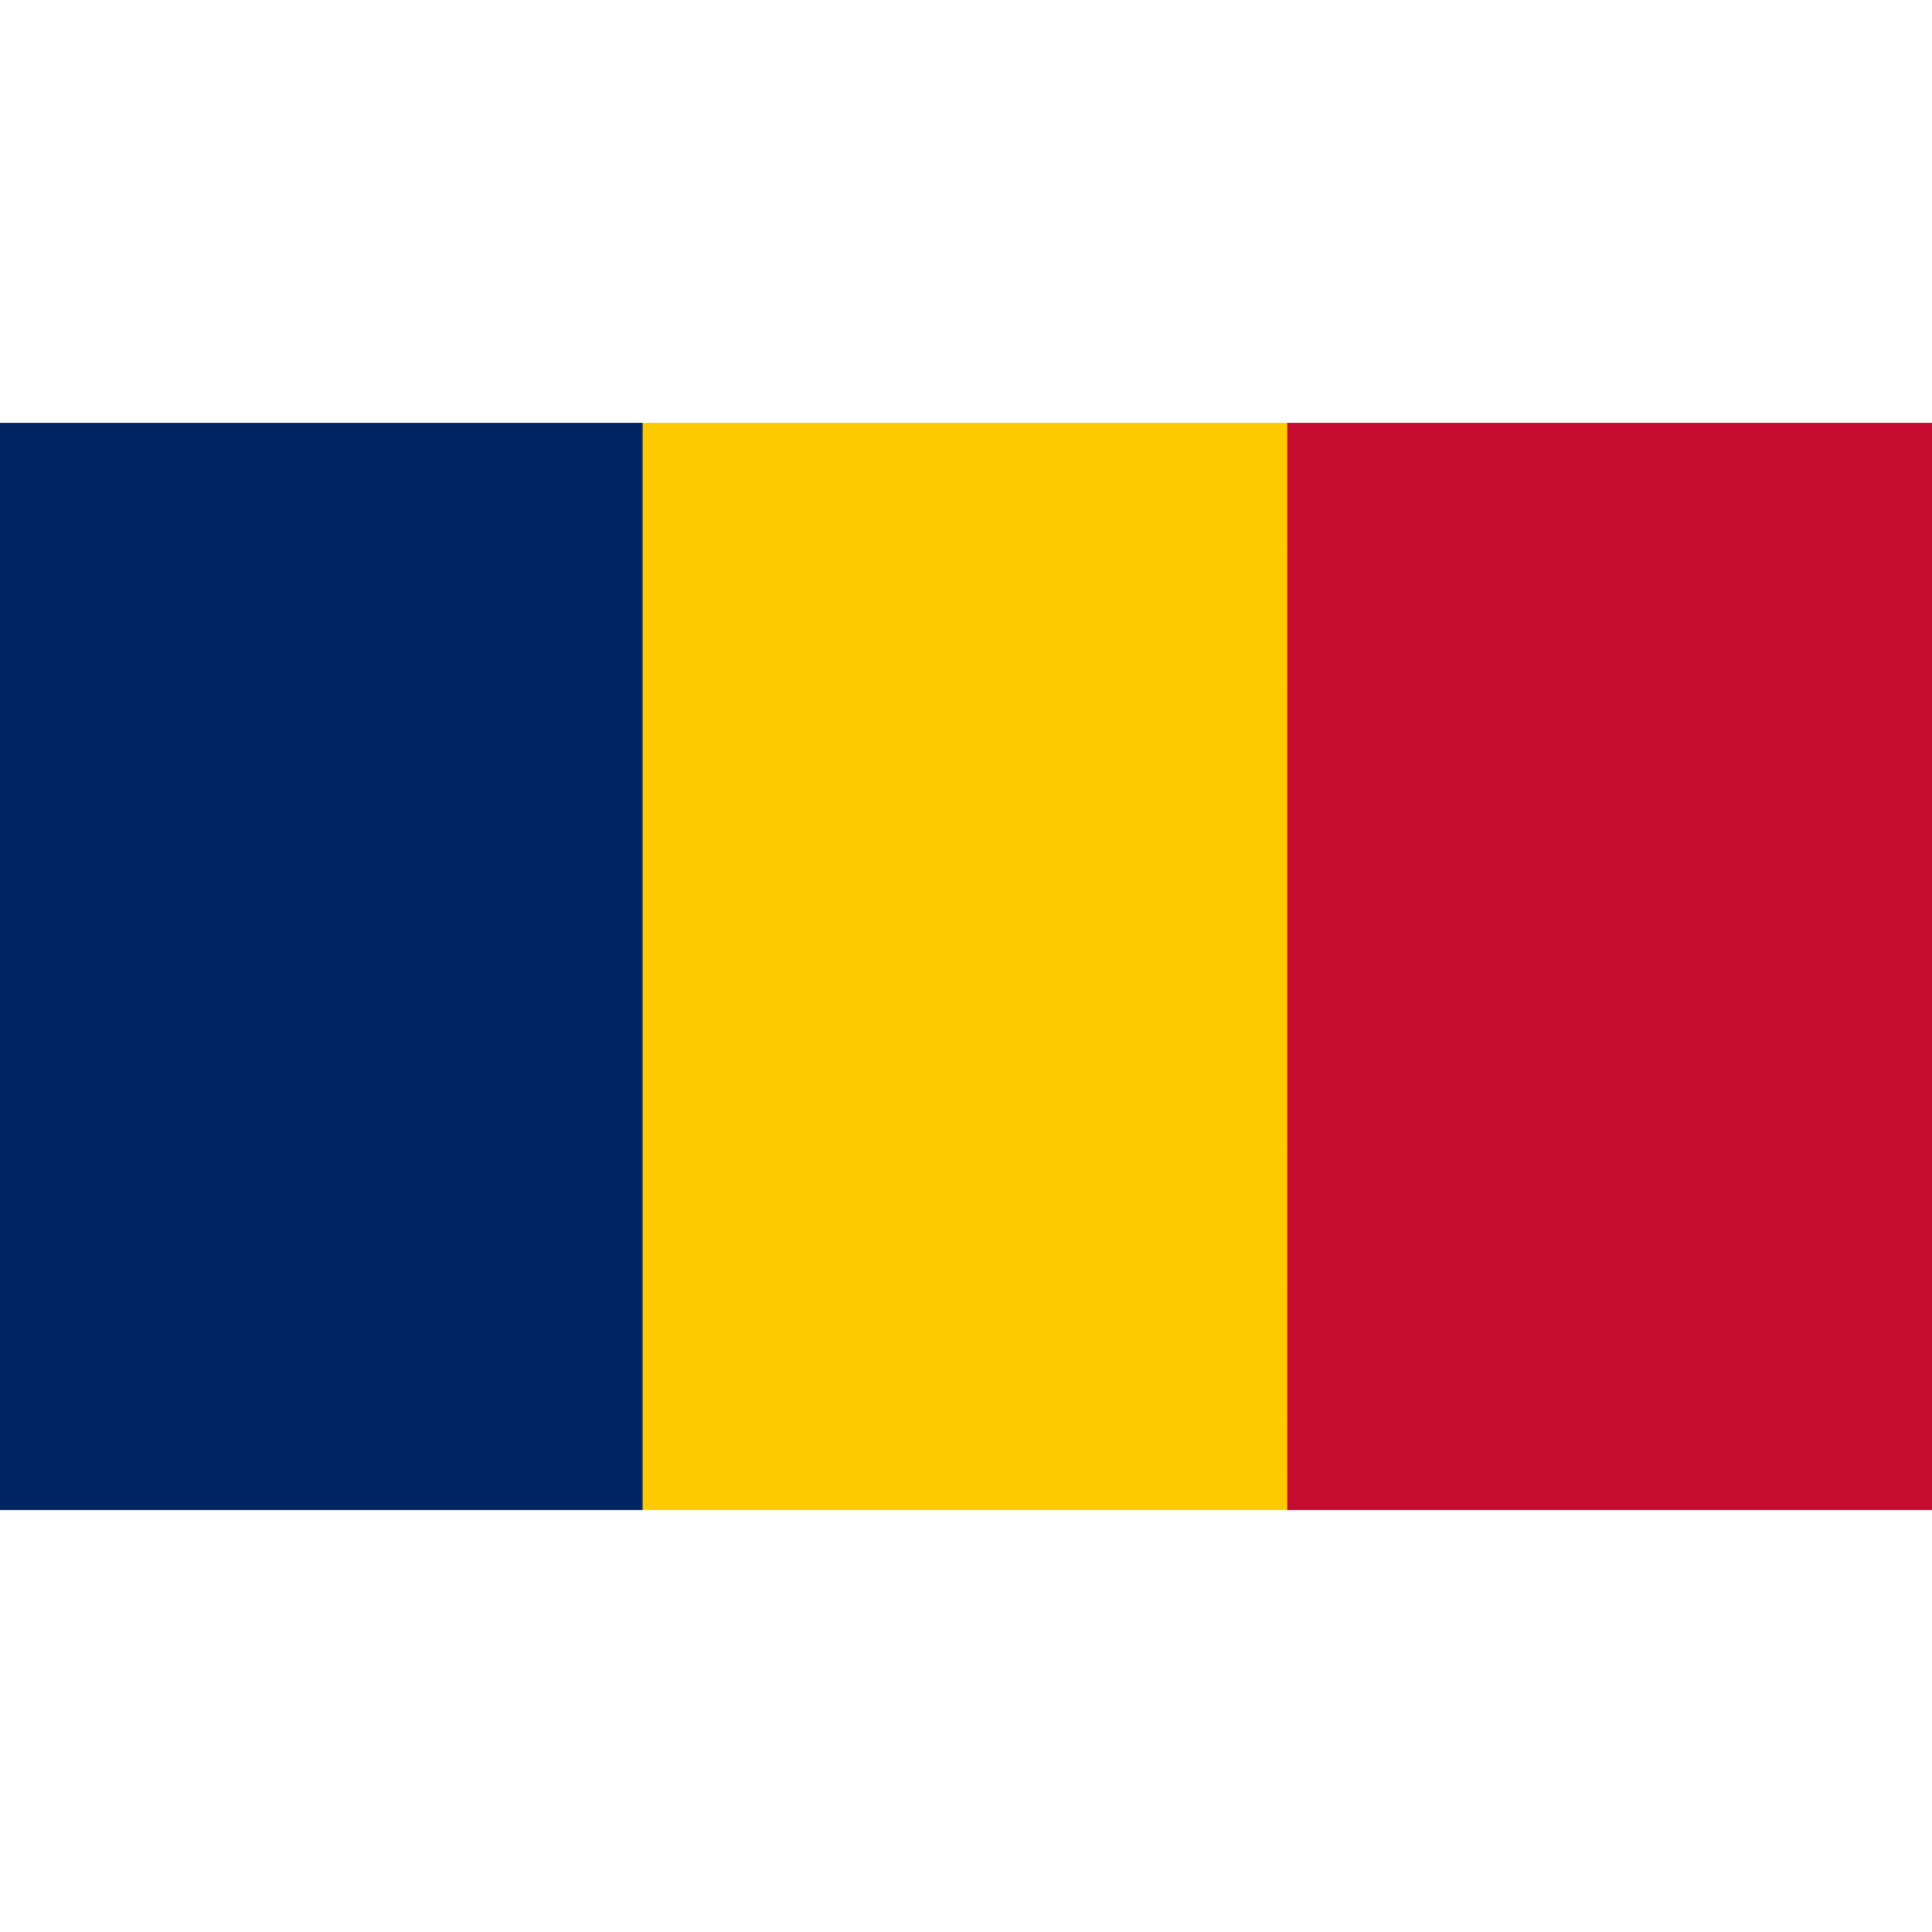 The flag of Chad has three vertical bands in blue, gold and red.